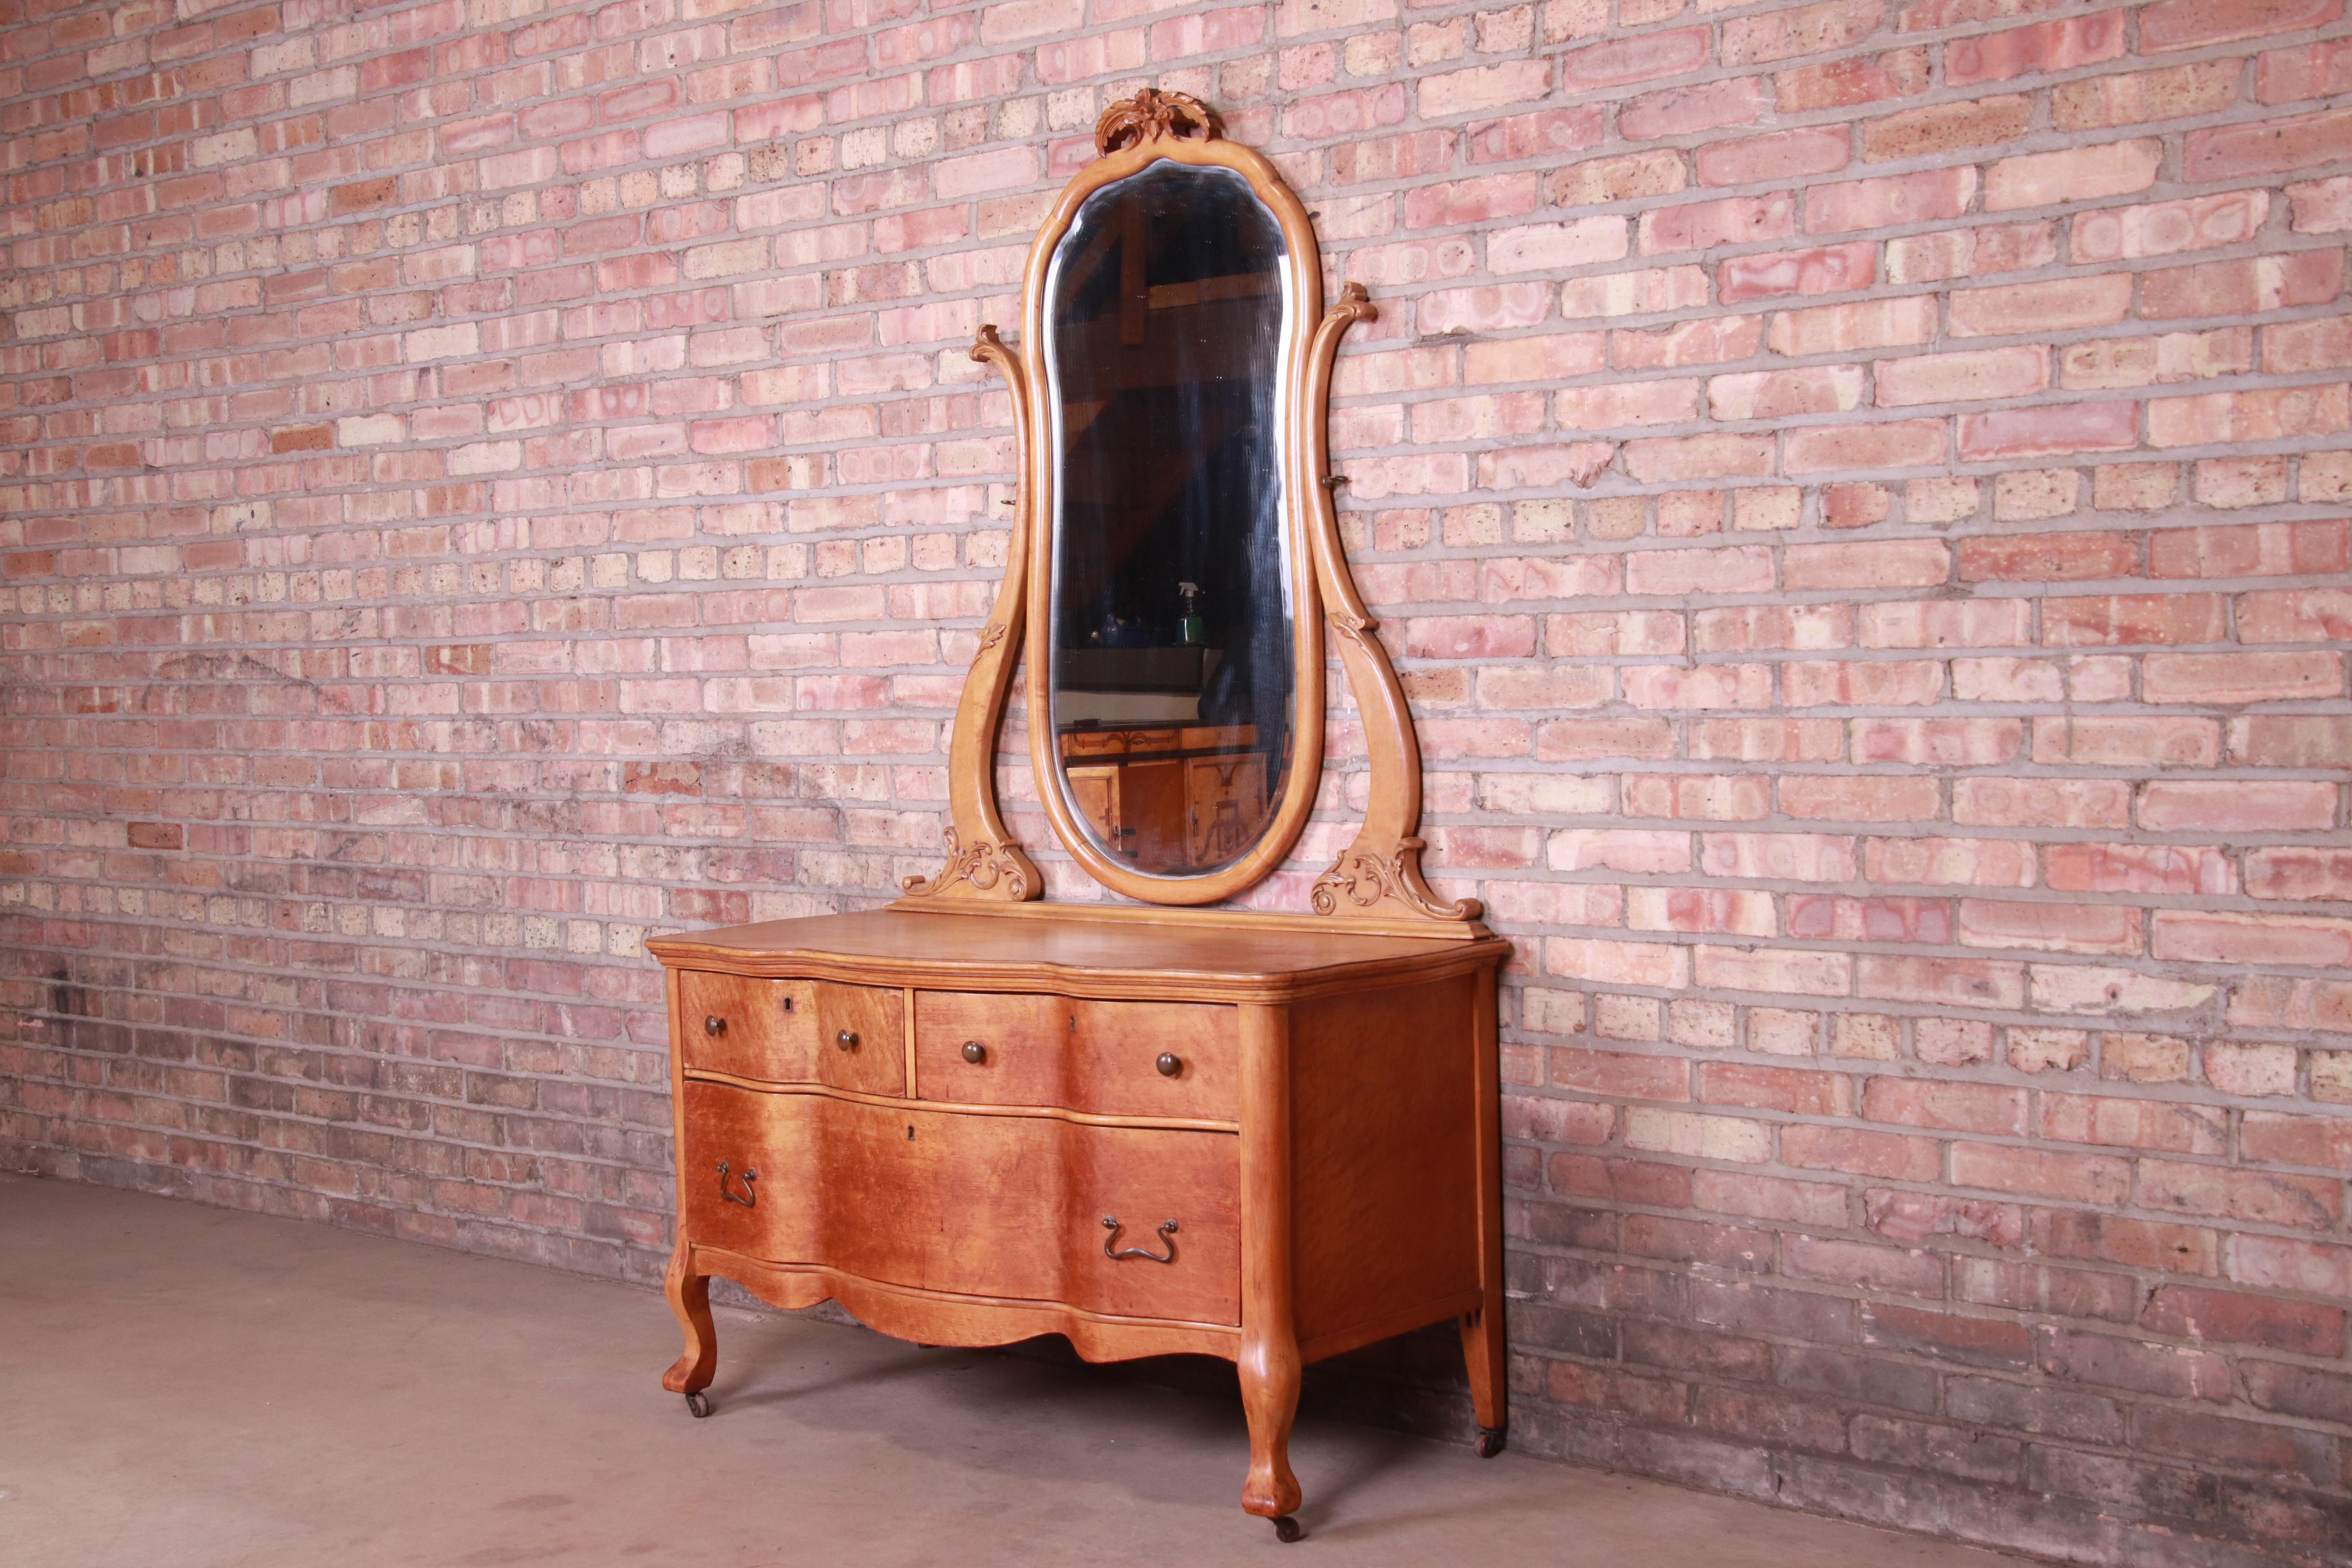 A gorgeous antique bird's-eye maple vanity dresser with mirror

By Luce Furniture Co. of Grand Rapids

USA, circa 1900

Measures: 45